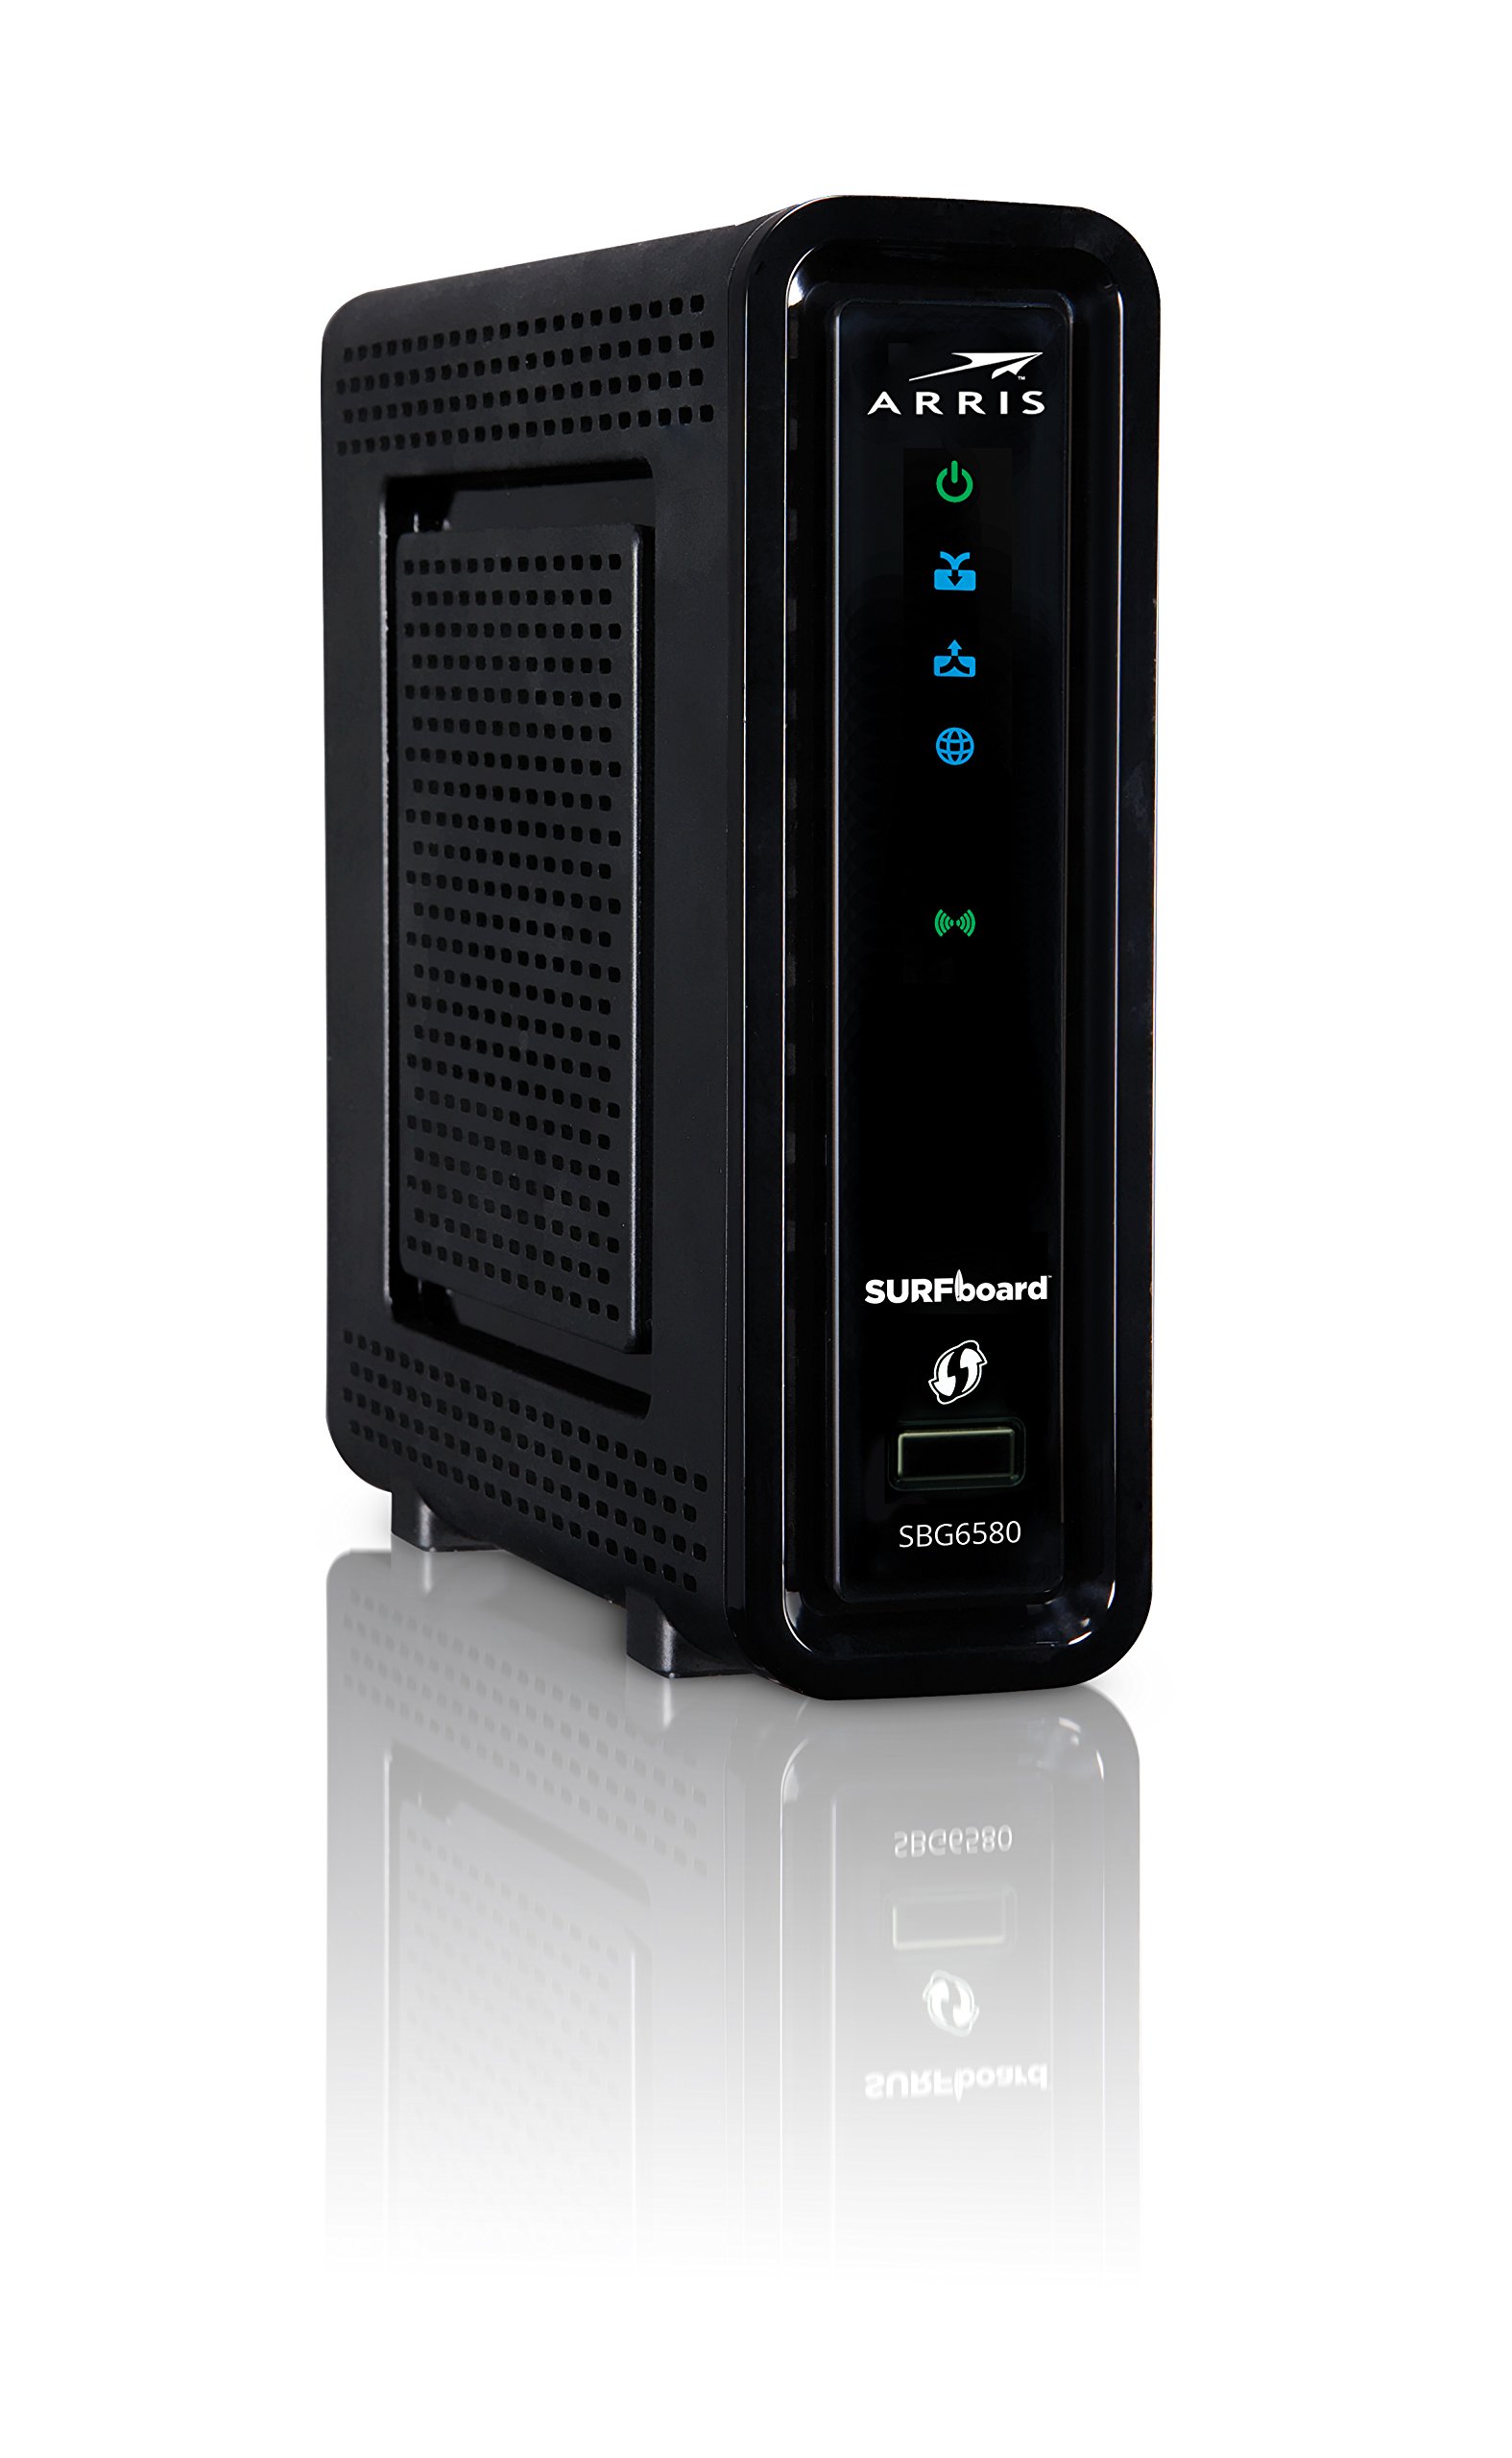 ARRIS SURFboard DOCSIS 3.0 Cable Modem / N600 Wi-Fi Dual-Band Router. Approved for XFINITY Comcast, Cox, Charter and most other Cable Internet providers for plans up to 150 Mbps.(SBG6580) - image 5 of 9